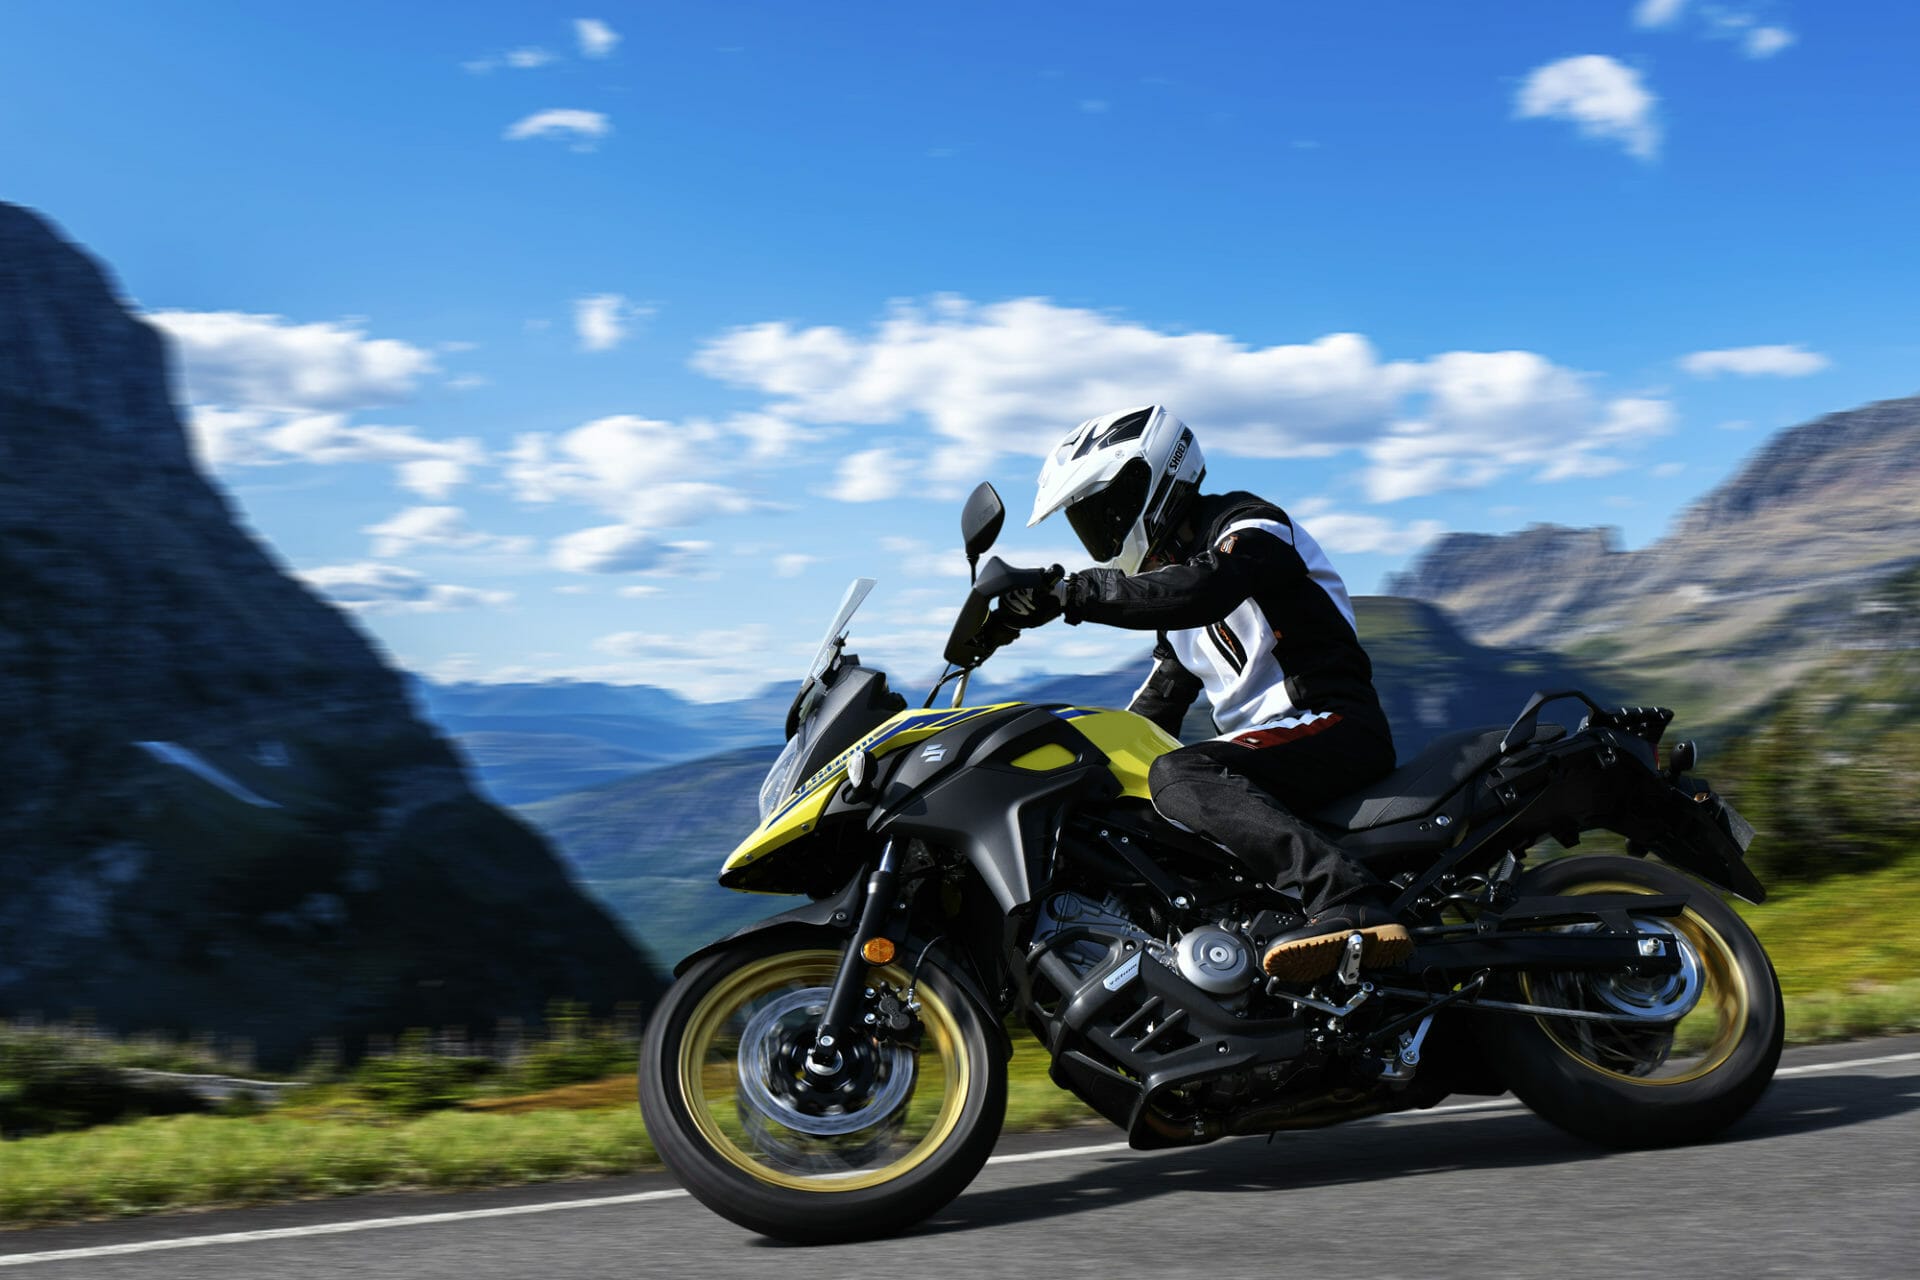 Suzuki V-Strom 650 gets new colors
- also in the MOTORCYCLES.NEWS APP